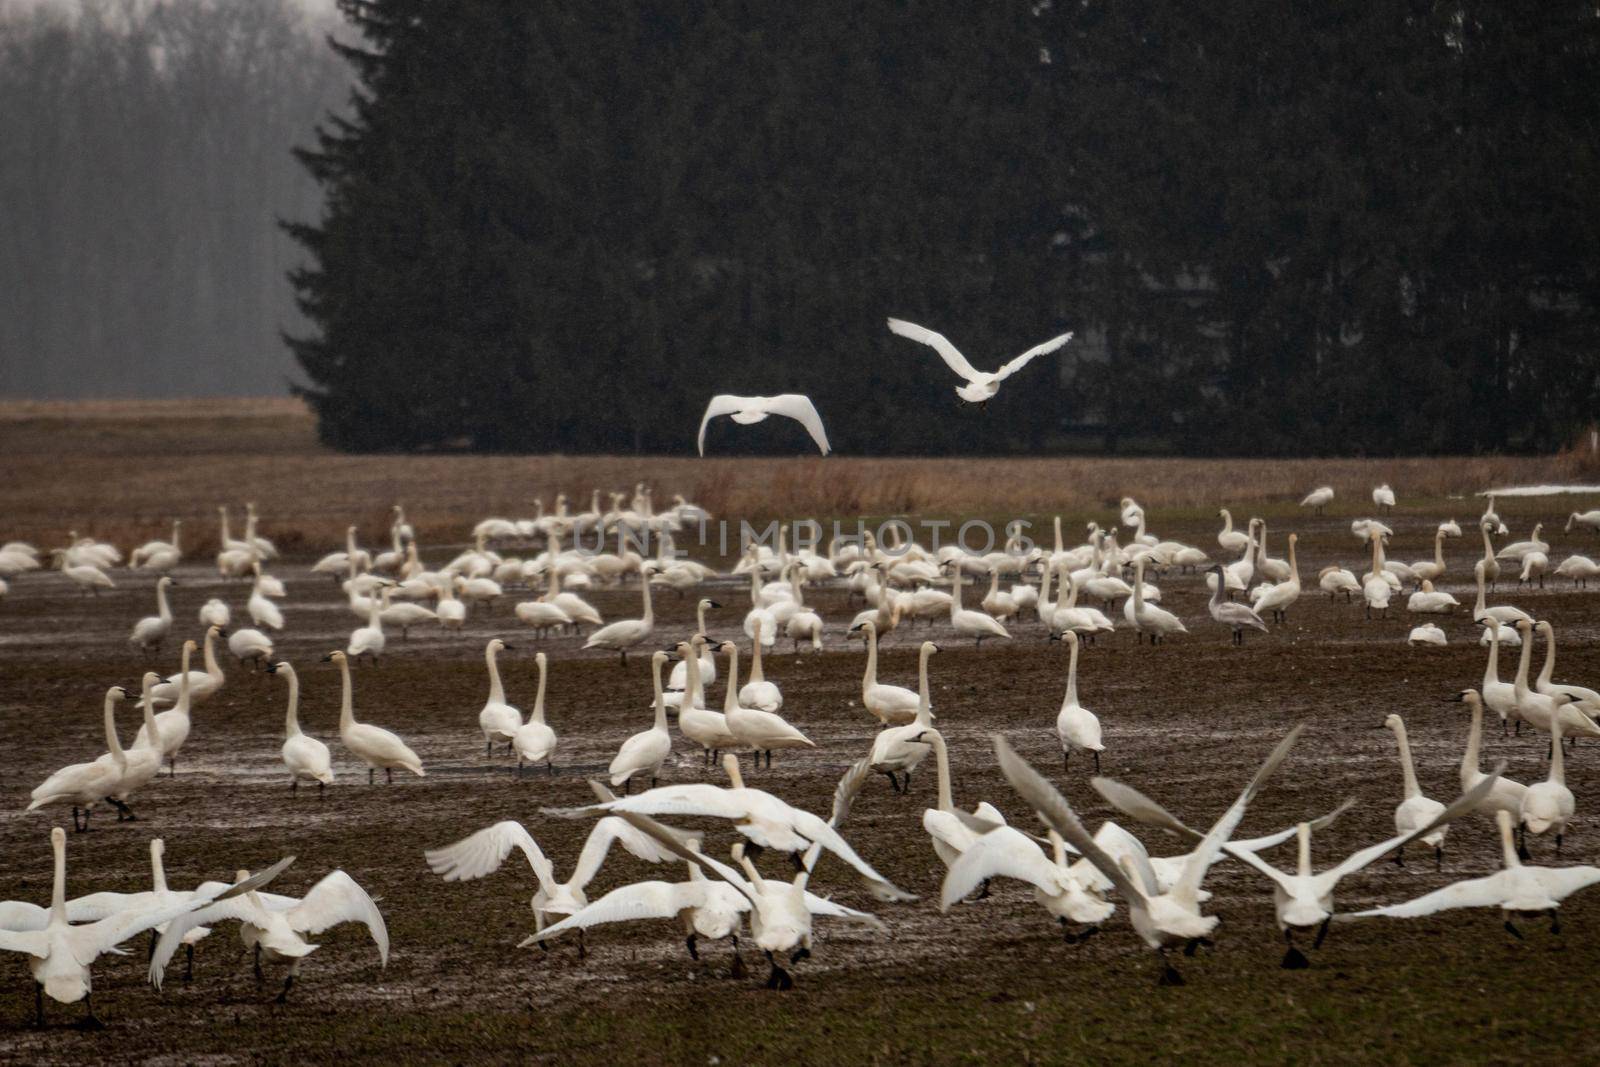 Tundra swans accumulating on a farmers field during winter migrations  by mynewturtle1